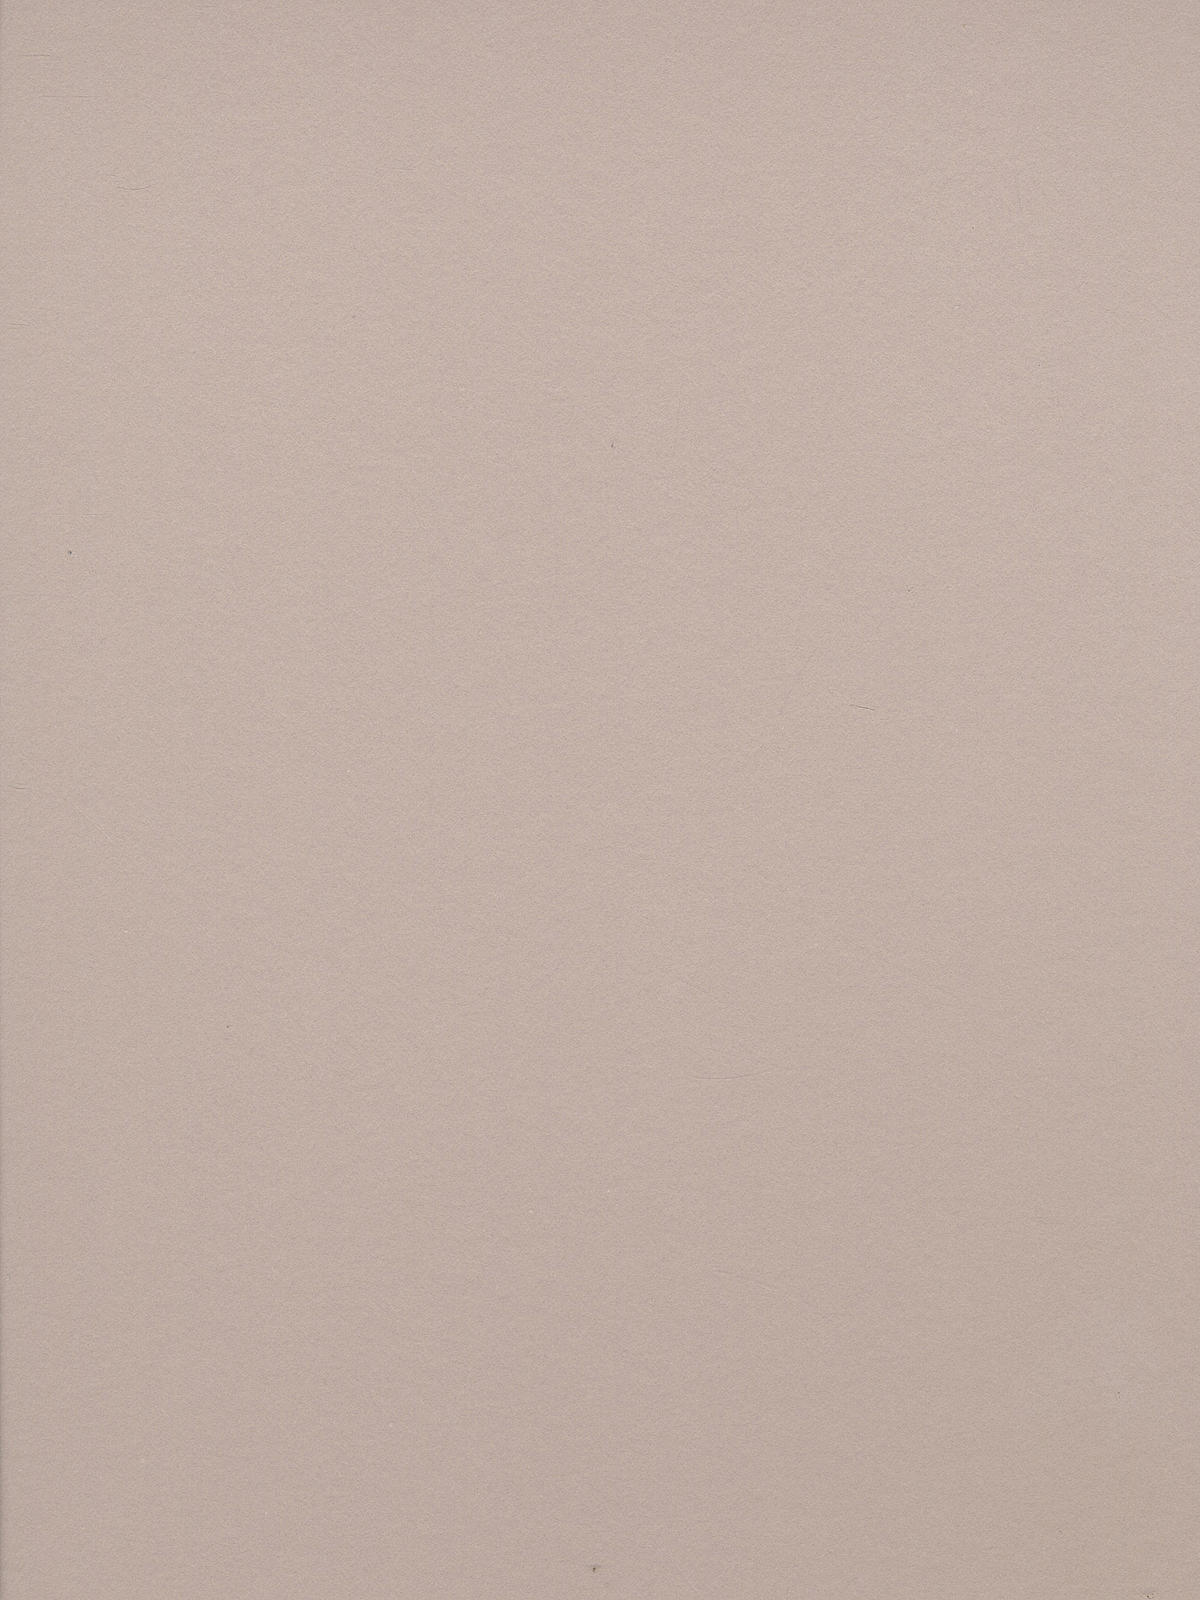 Museum Mounting Board Acid Free Photo Gray 2 Ply Each